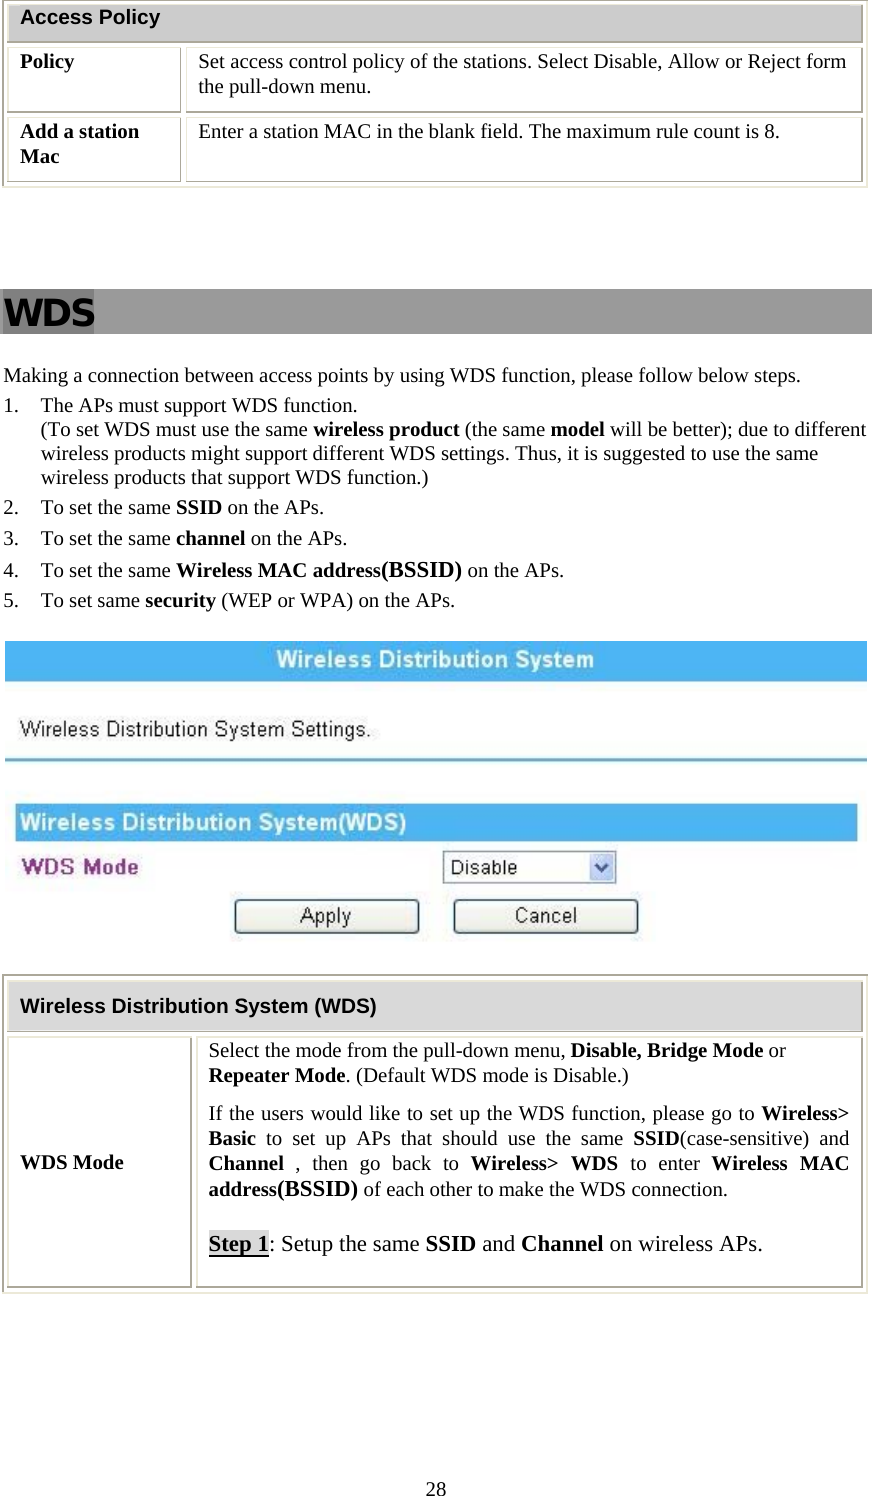   28Access Policy Policy  Set access control policy of the stations. Select Disable, Allow or Reject form the pull-down menu.  Add a station Mac  Enter a station MAC in the blank field. The maximum rule count is 8.    WDS Making a connection between access points by using WDS function, please follow below steps. 1. The APs must support WDS function.  (To set WDS must use the same wireless product (the same model will be better); due to different wireless products might support different WDS settings. Thus, it is suggested to use the same wireless products that support WDS function.) 2. To set the same SSID on the APs. 3. To set the same channel on the APs. 4. To set the same Wireless MAC address(BSSID) on the APs. 5. To set same security (WEP or WPA) on the APs.  Wireless Distribution System (WDS) WDS Mode Select the mode from the pull-down menu, Disable, Bridge Mode or Repeater Mode. (Default WDS mode is Disable.) If the users would like to set up the WDS function, please go to Wireless&gt; Basic to set up APs that should use the same SSID(case-sensitive) and Channel , then go back to Wireless&gt; WDS to enter Wireless MAC address(BSSID) of each other to make the WDS connection.  Step 1: Setup the same SSID and Channel on wireless APs. 